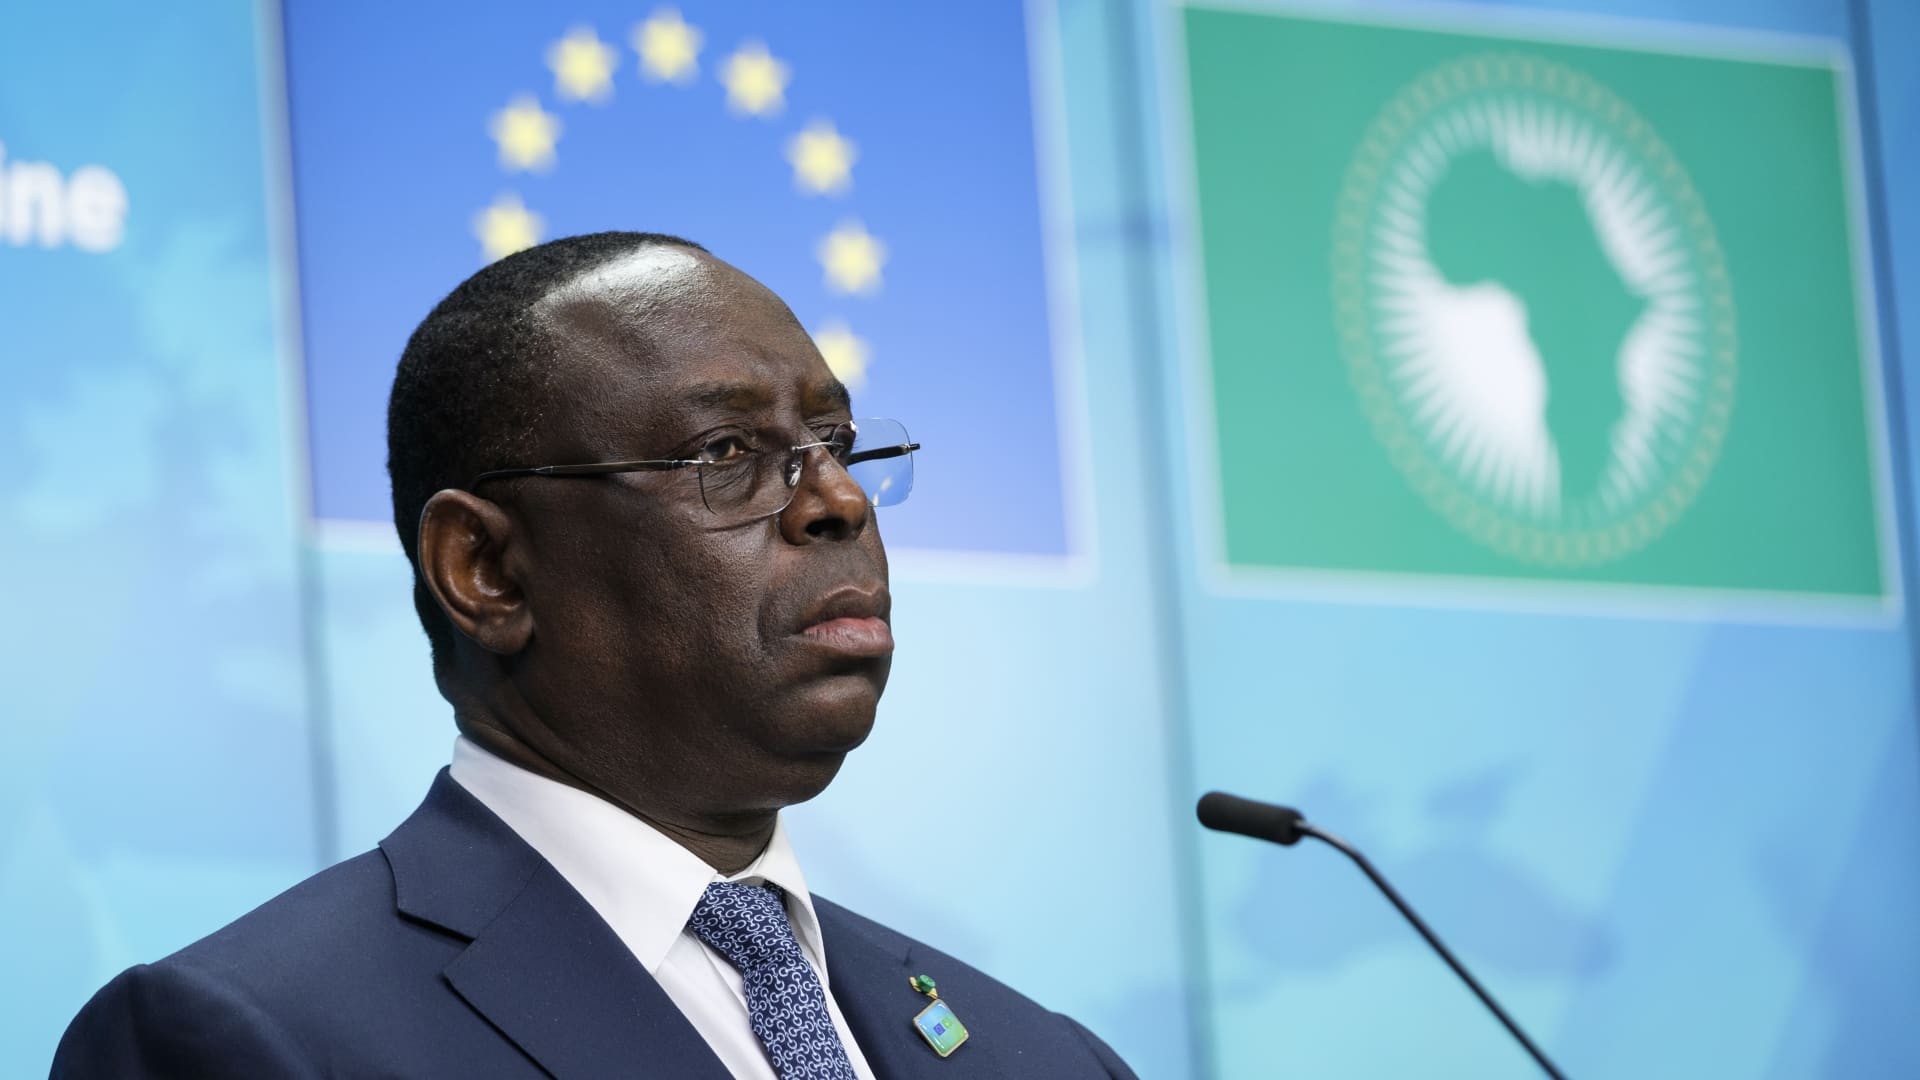 President of Senegal Macky Sall speaks to media during an EU-Africa Summit on February 17, 2022 in Brussels, Belgium.